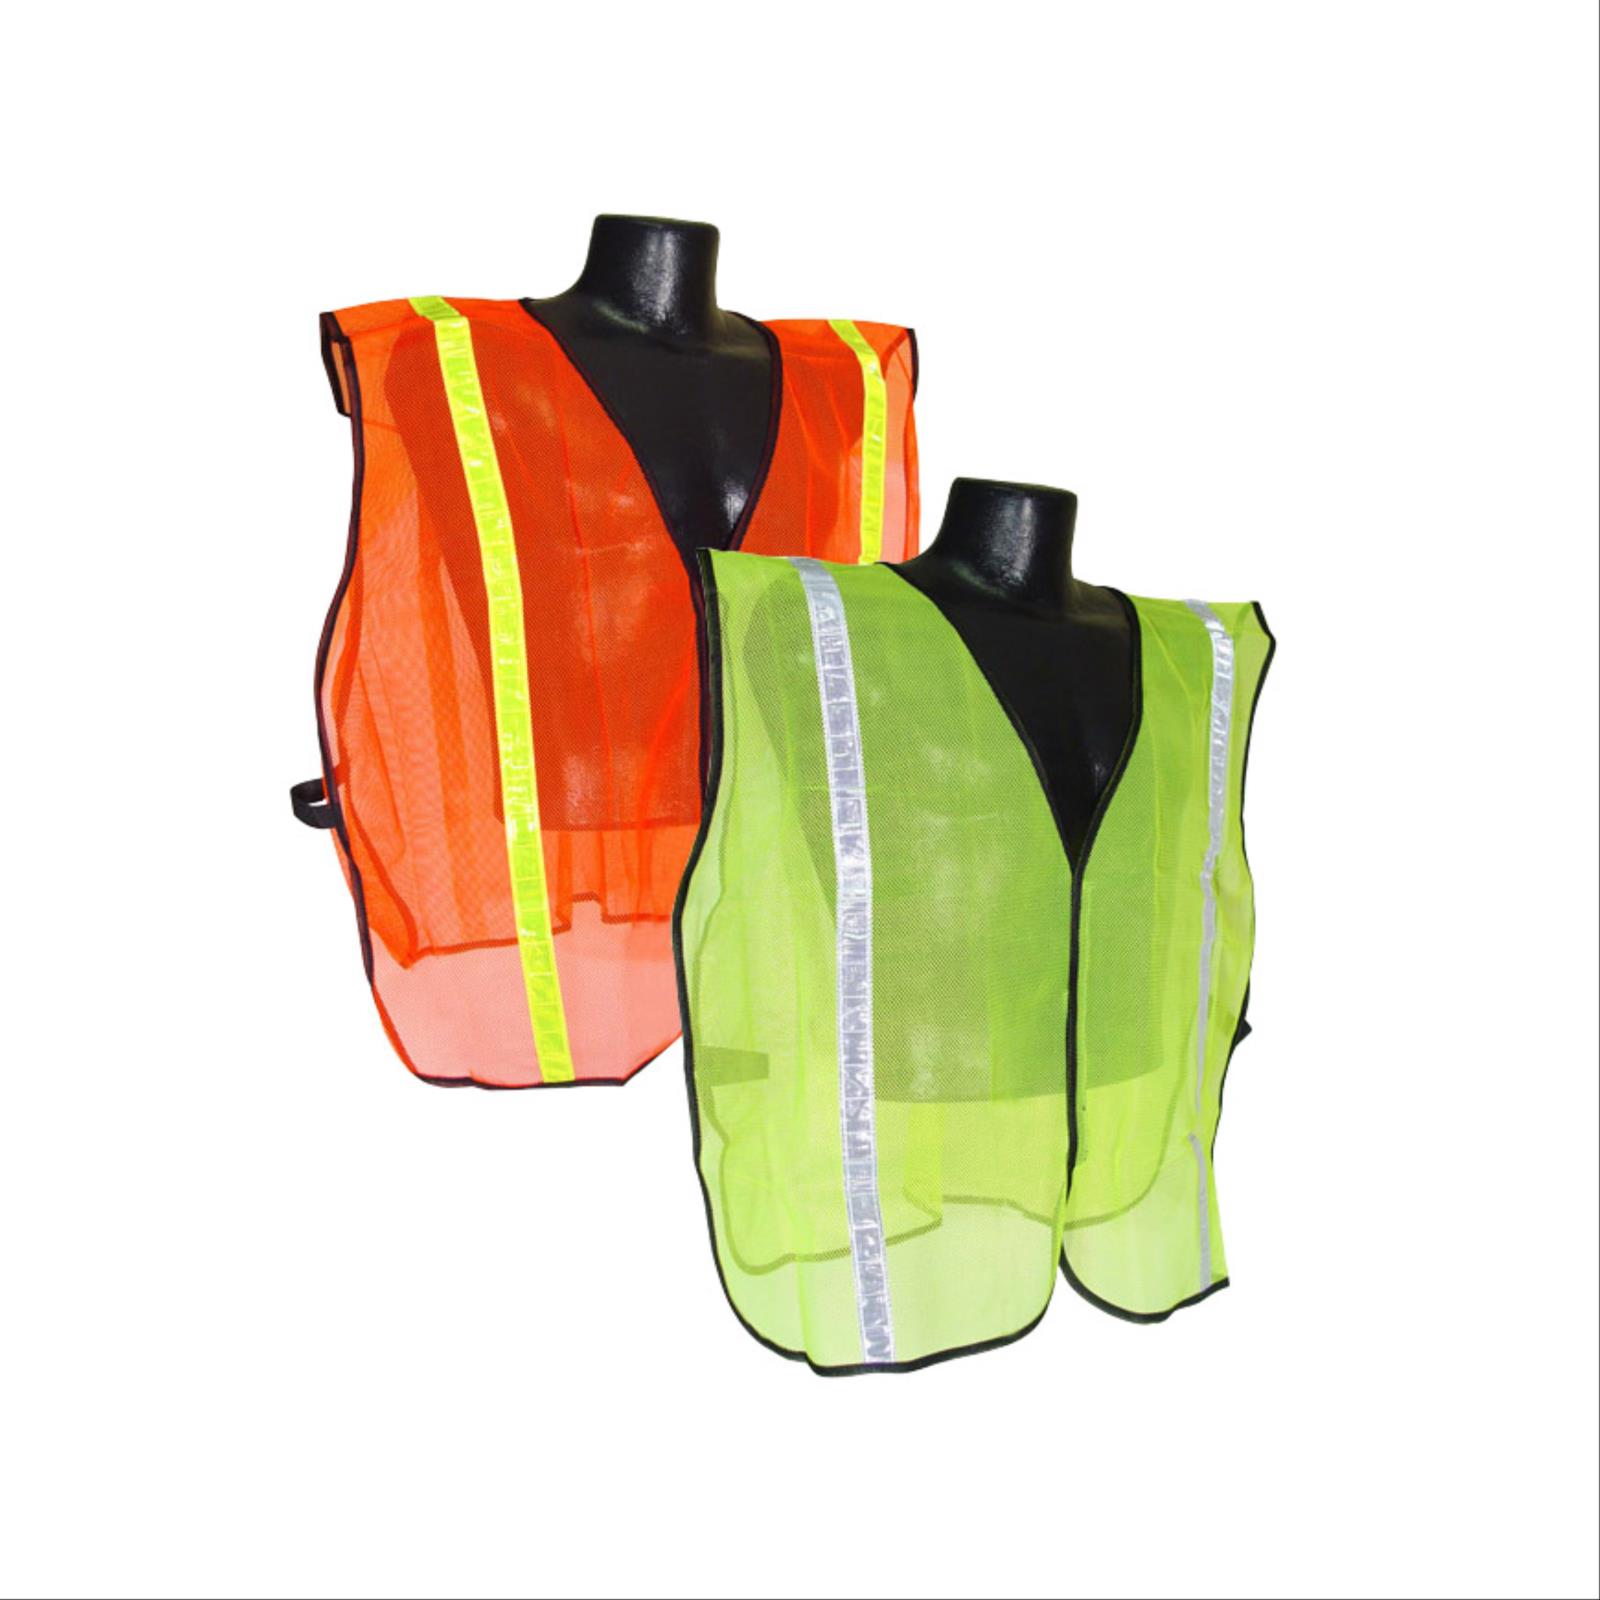 Radwear™ SV1 Non-Rated Safety Vest